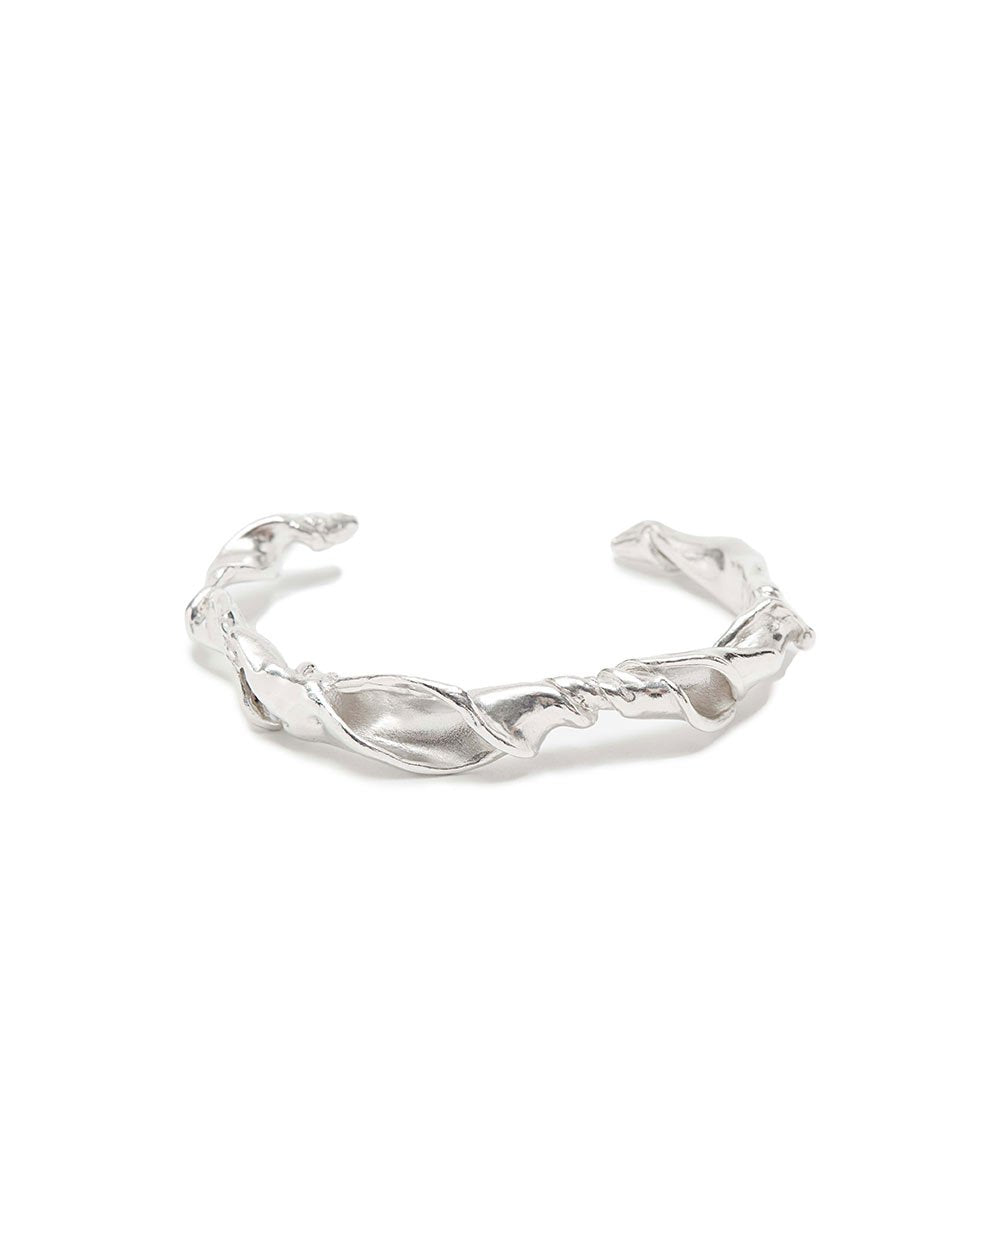 Fluid twisted recycled silver cuff | All Its Forms